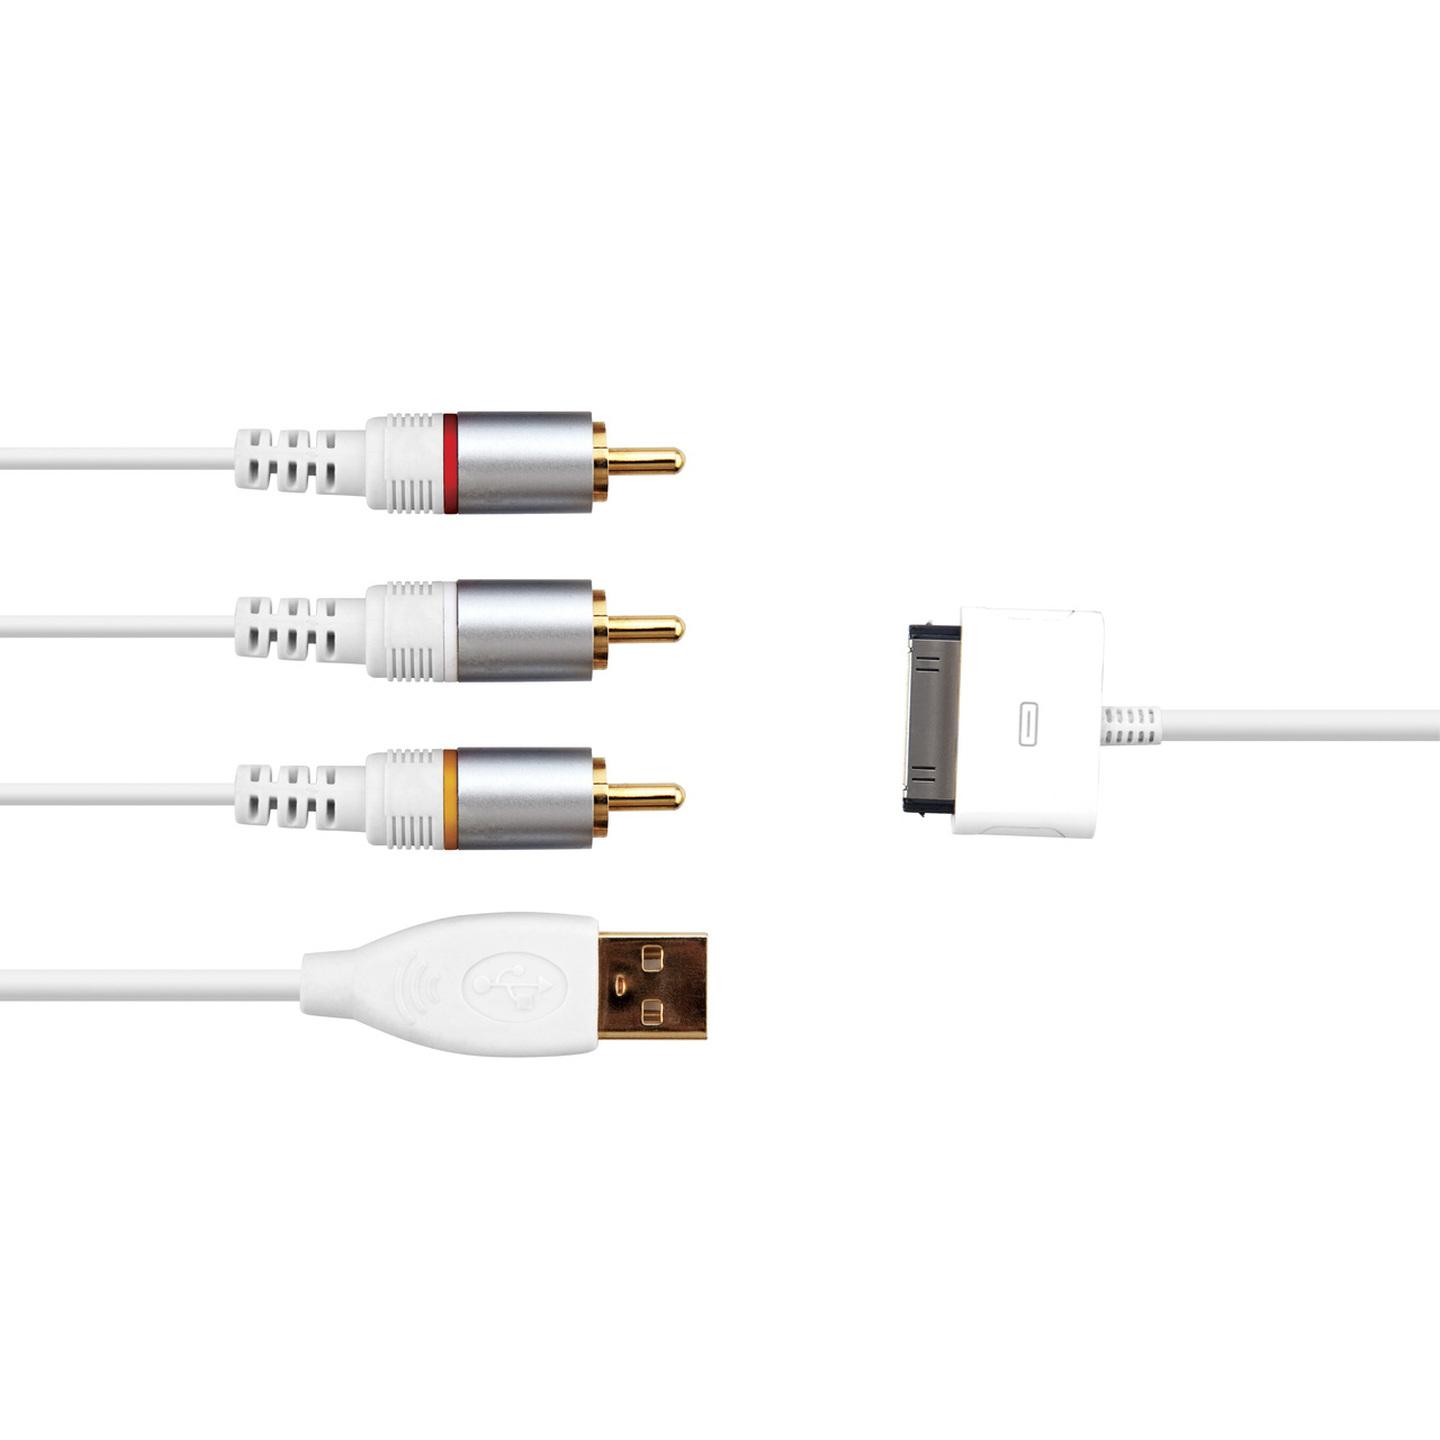 Audio Video Cable for iPod iTouch or iPhone